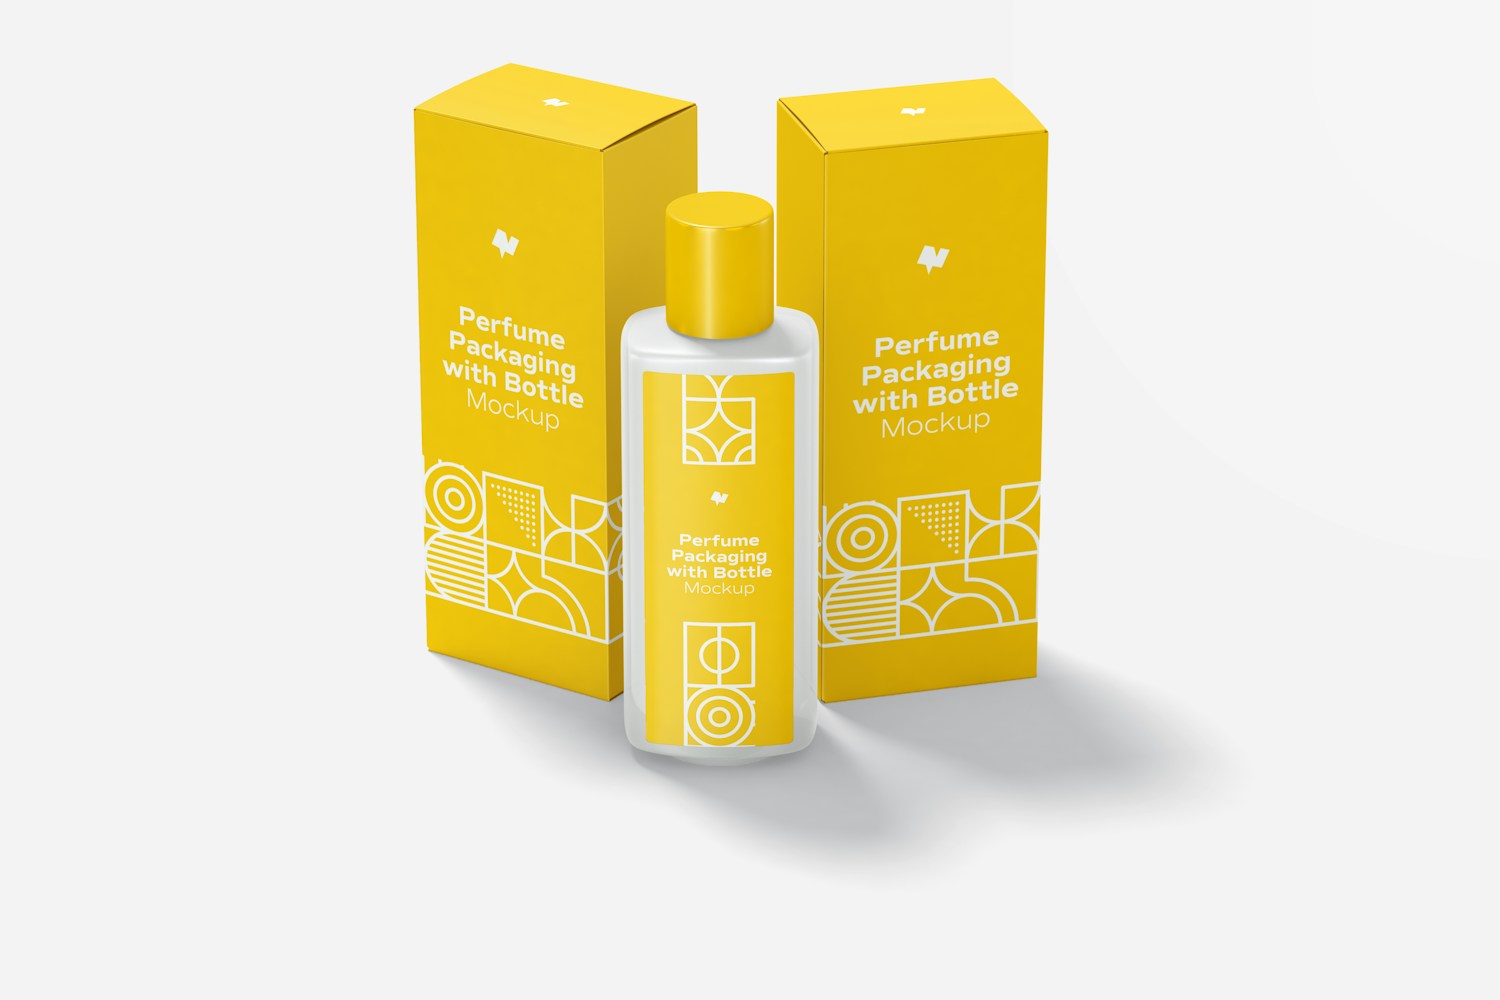 Large Perfume Packaging with Bottle Mockup, Front View